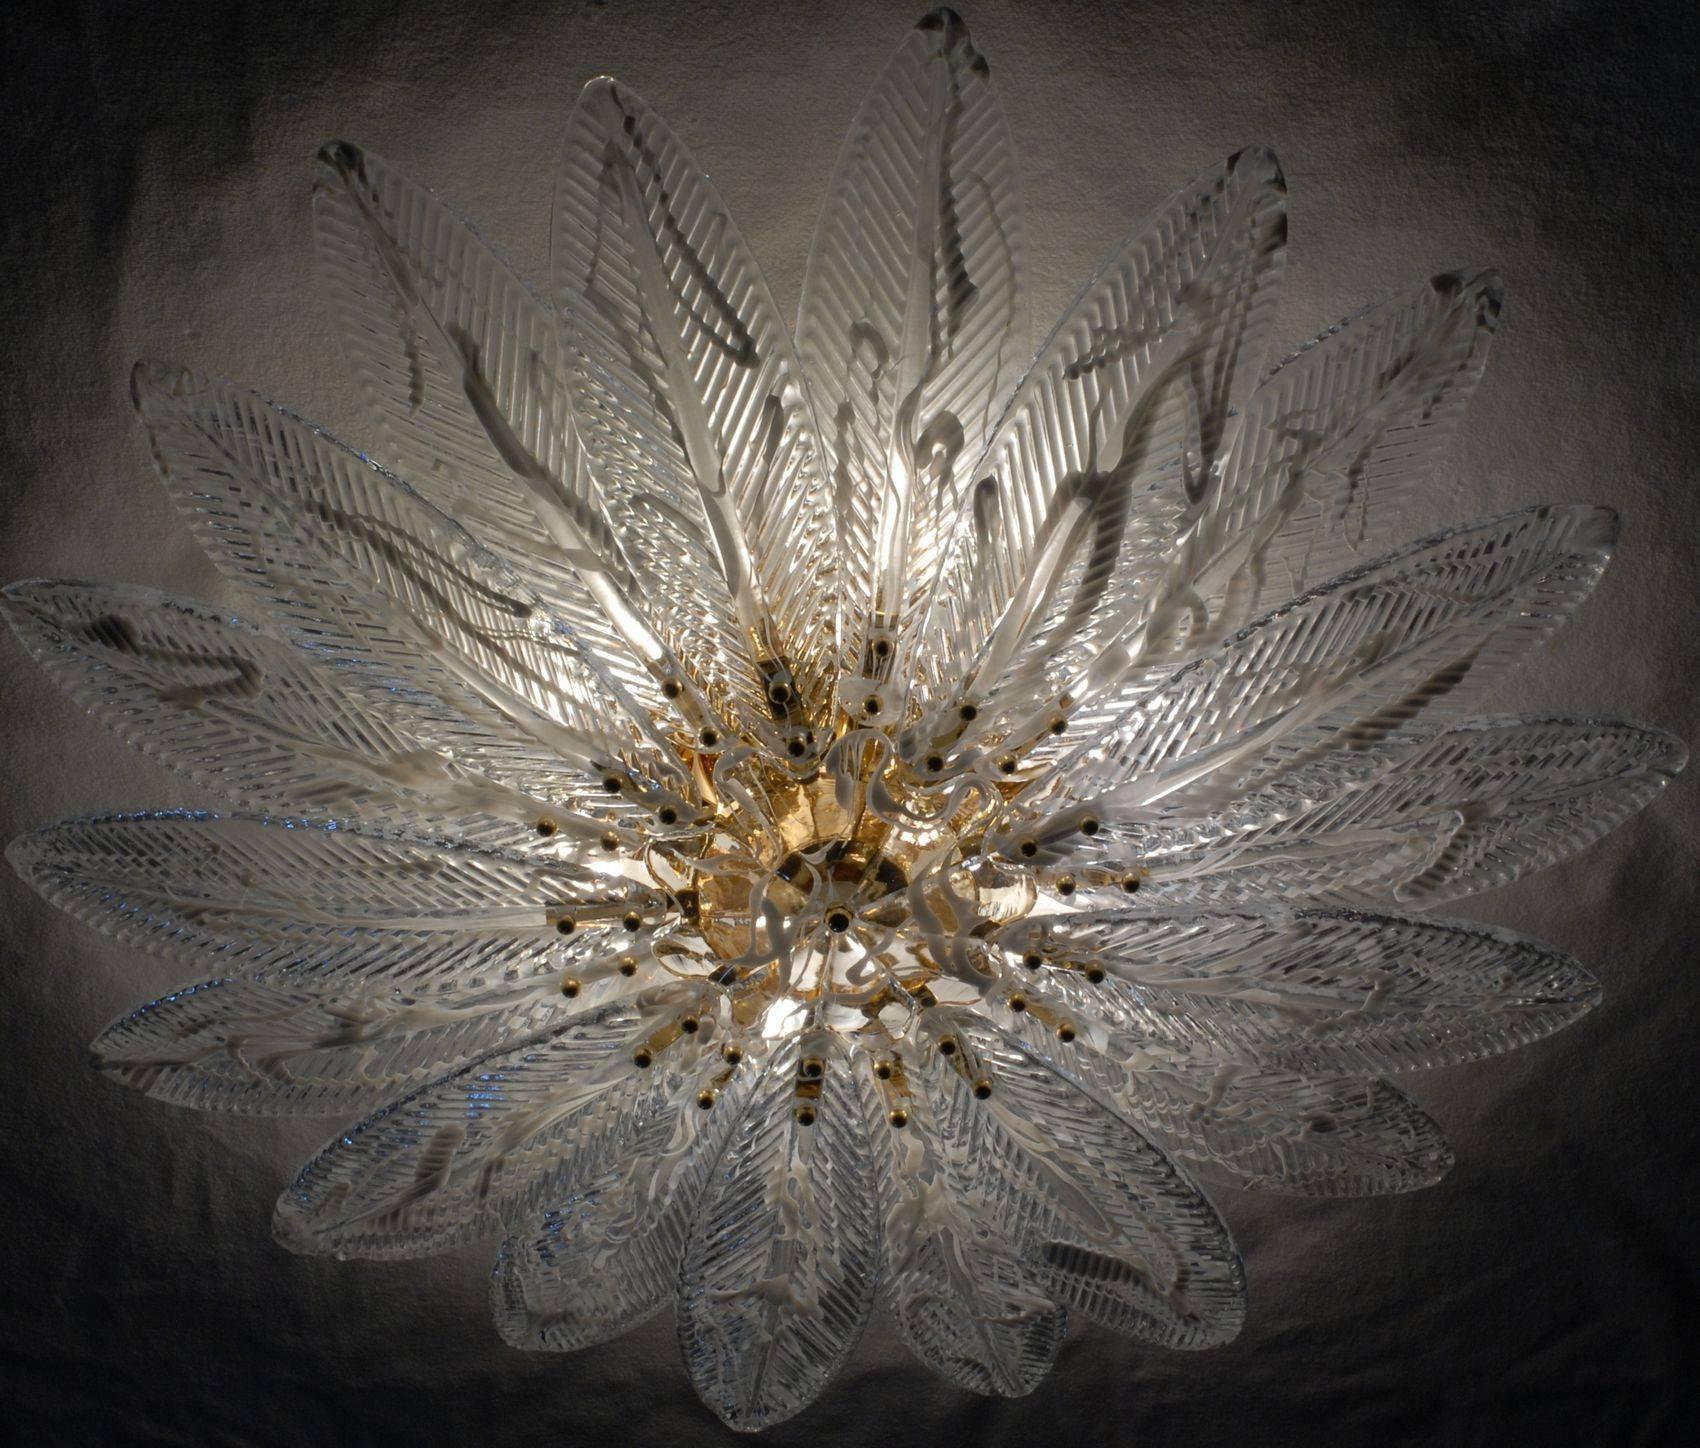 Here the larger version of the successful 12 leaves compact palmette ceiling fixture.

This group of shallow ceiling mount Murano chandelier was first designed for a luxury yacht low ceiling and now is used to pair with Mid-Century Modern Barovier